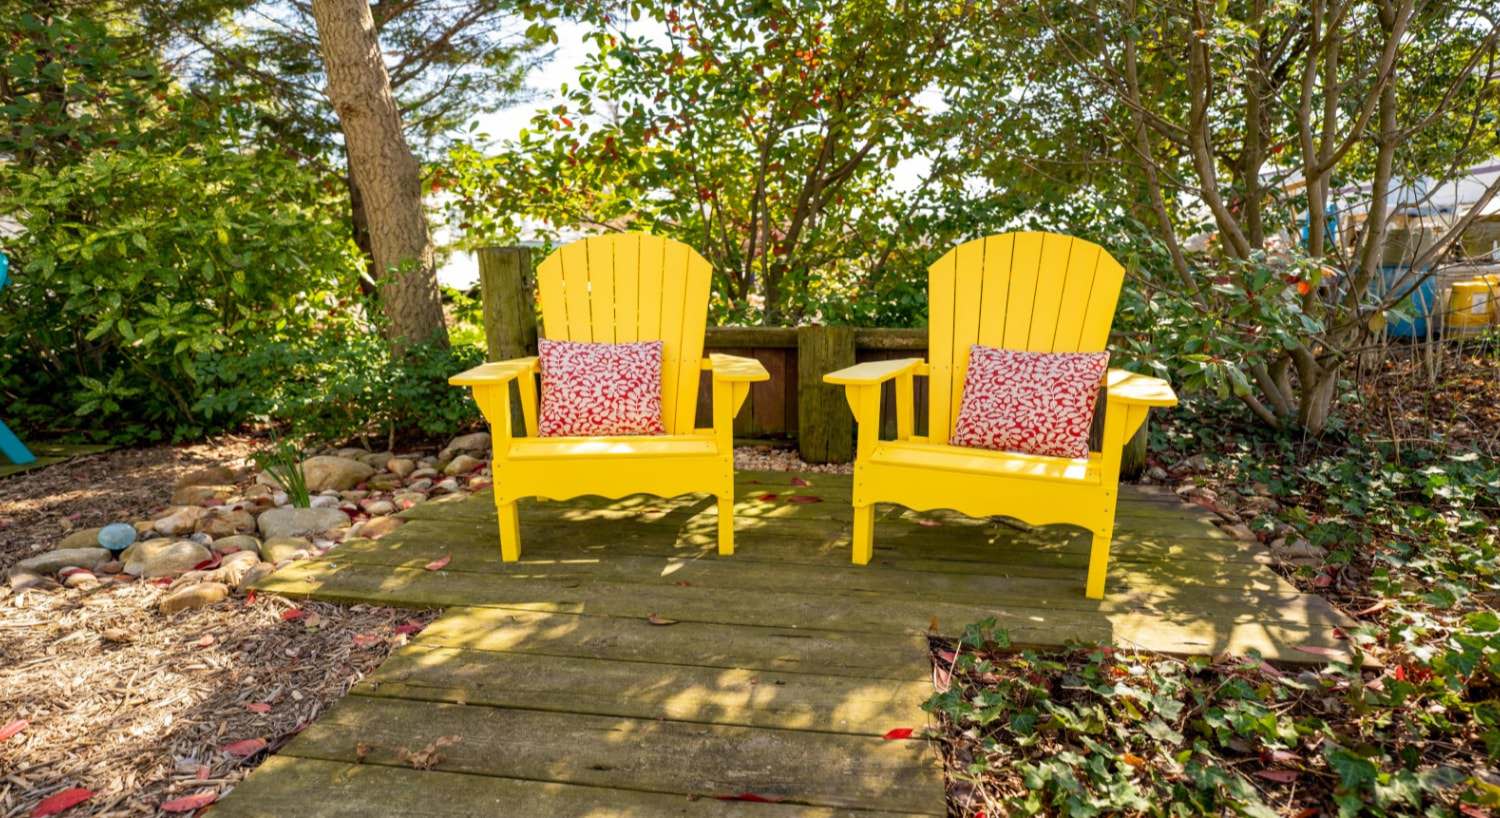 Two bright yellow adirondack chairs each with a red and white floral patterned pillow surrounded by green shrubs and trees